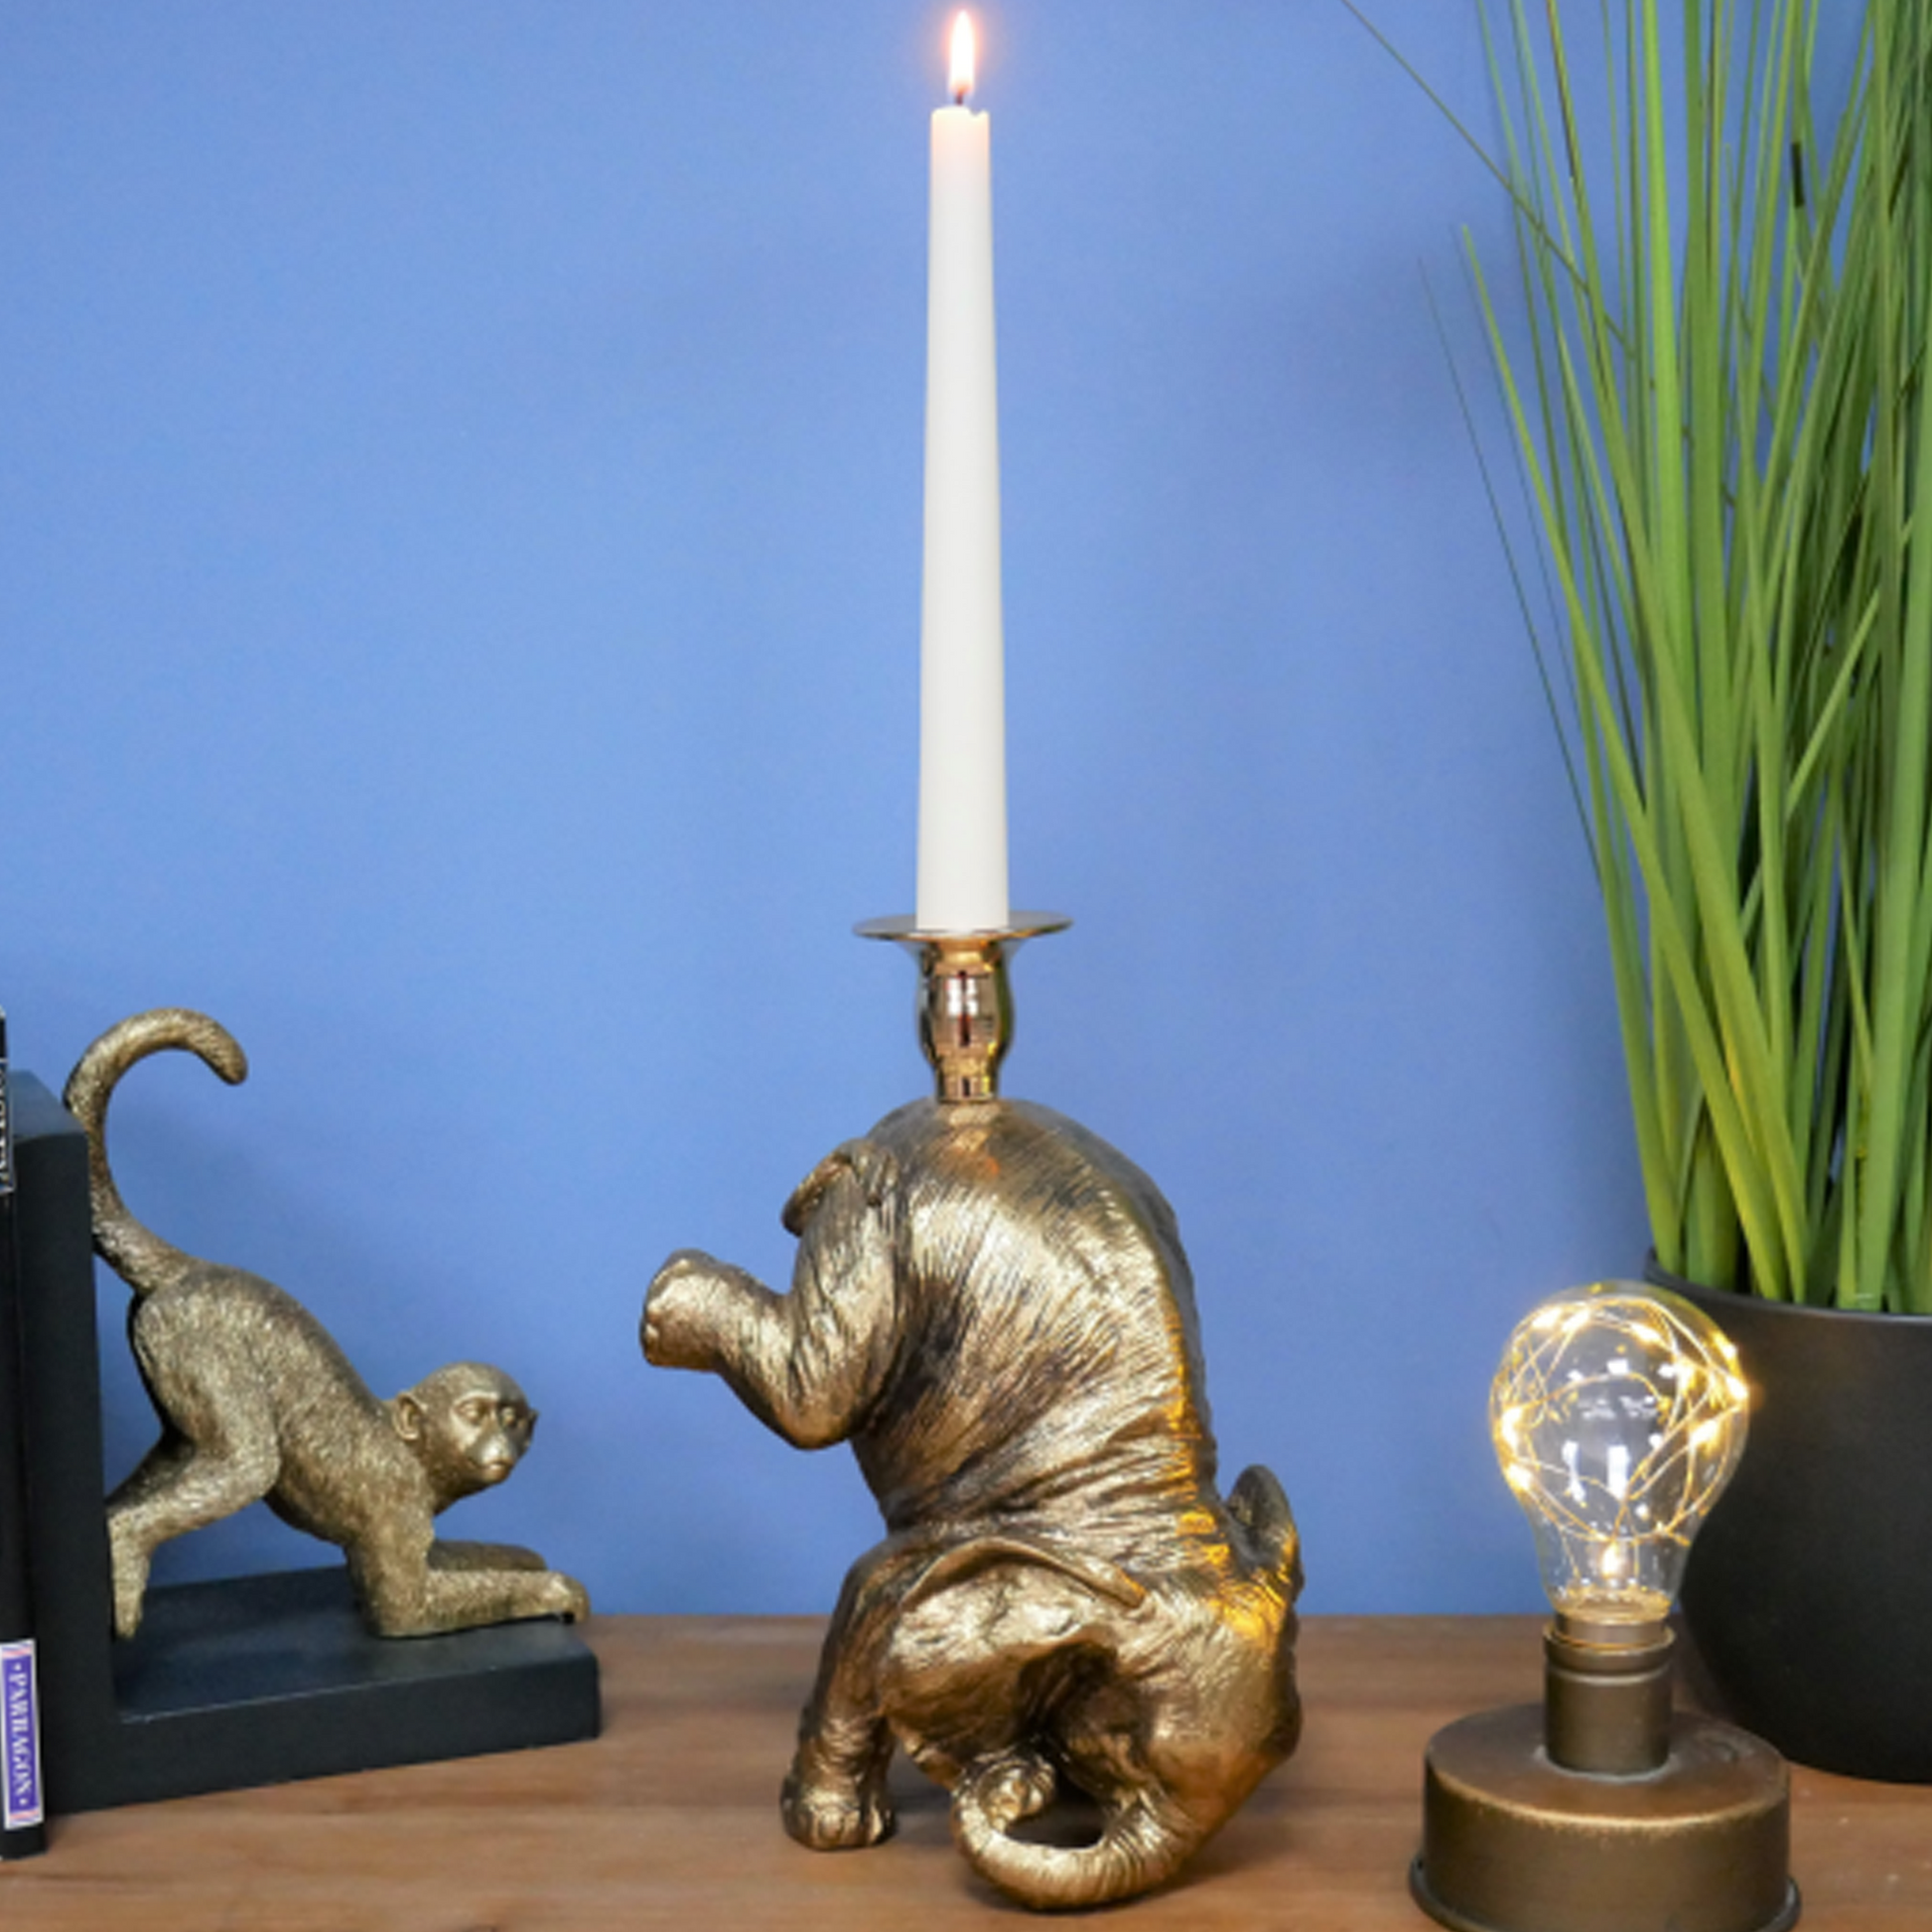 Gold Baby Elephant Candle Holder on a Desk | Happy Piranha